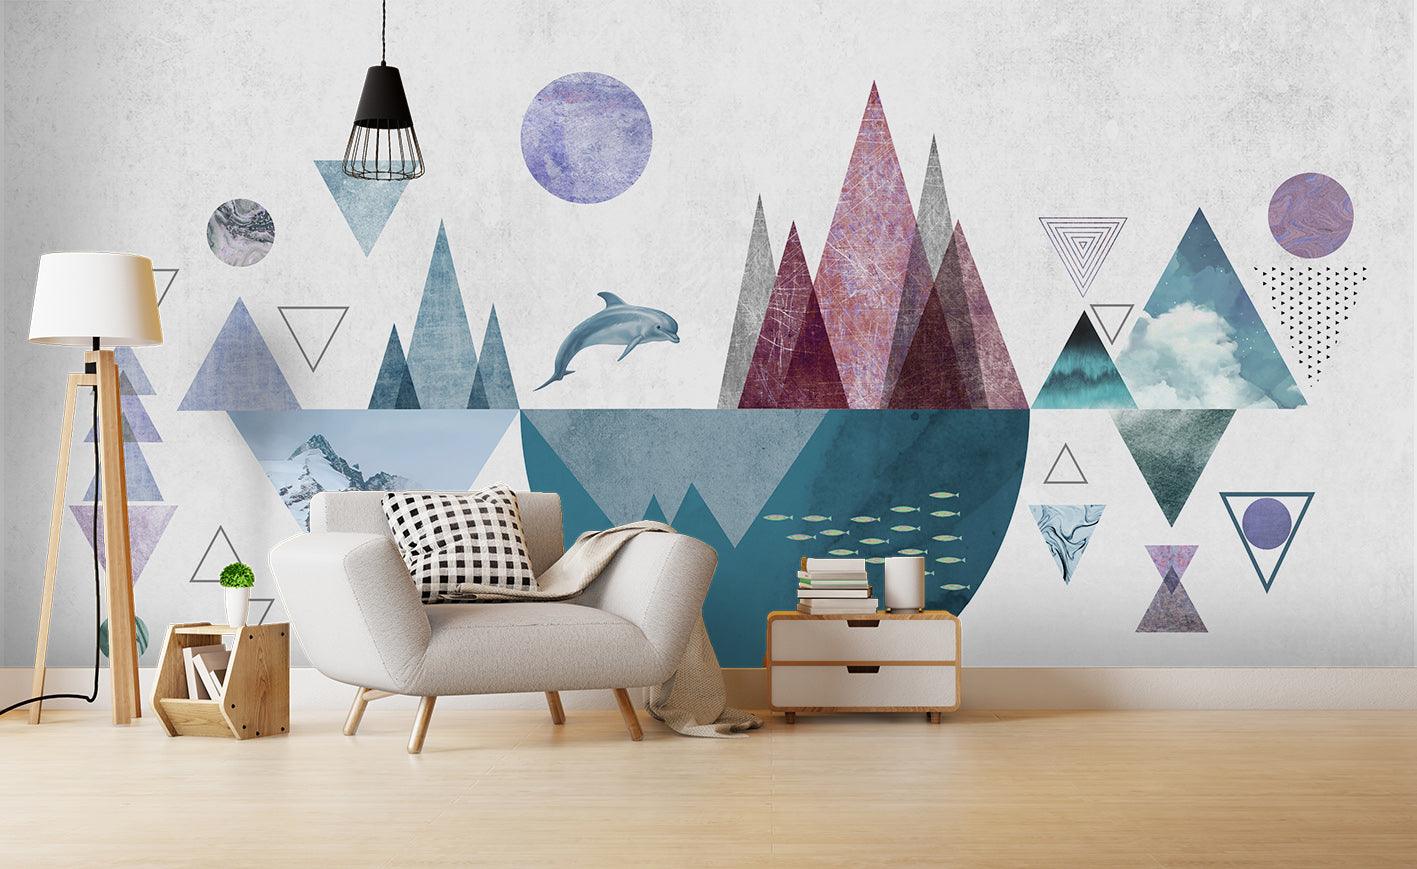 3D Abstract Triangle Mountain Wall Mural Wallpaper 56- Jess Art Decoration